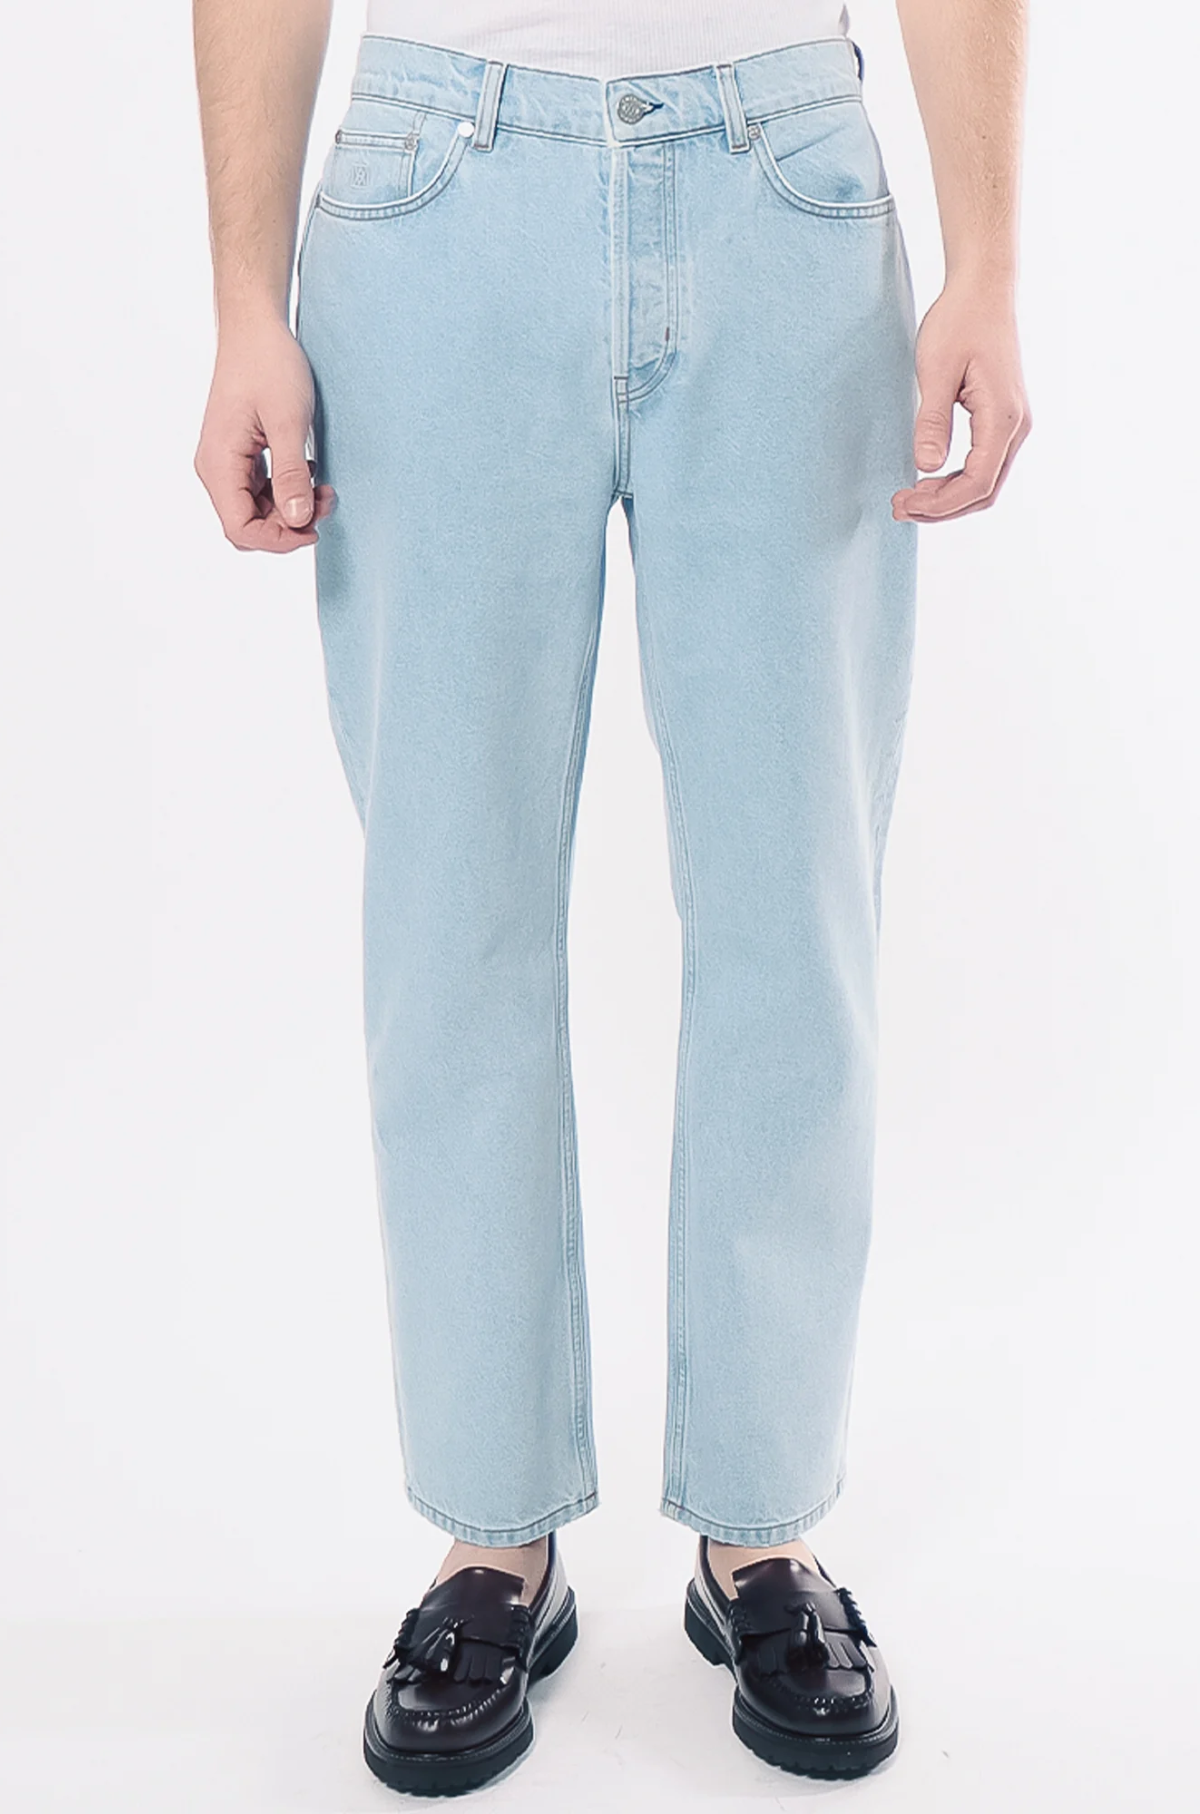 Bob - Bright Eyes - Straight Fit Jeans